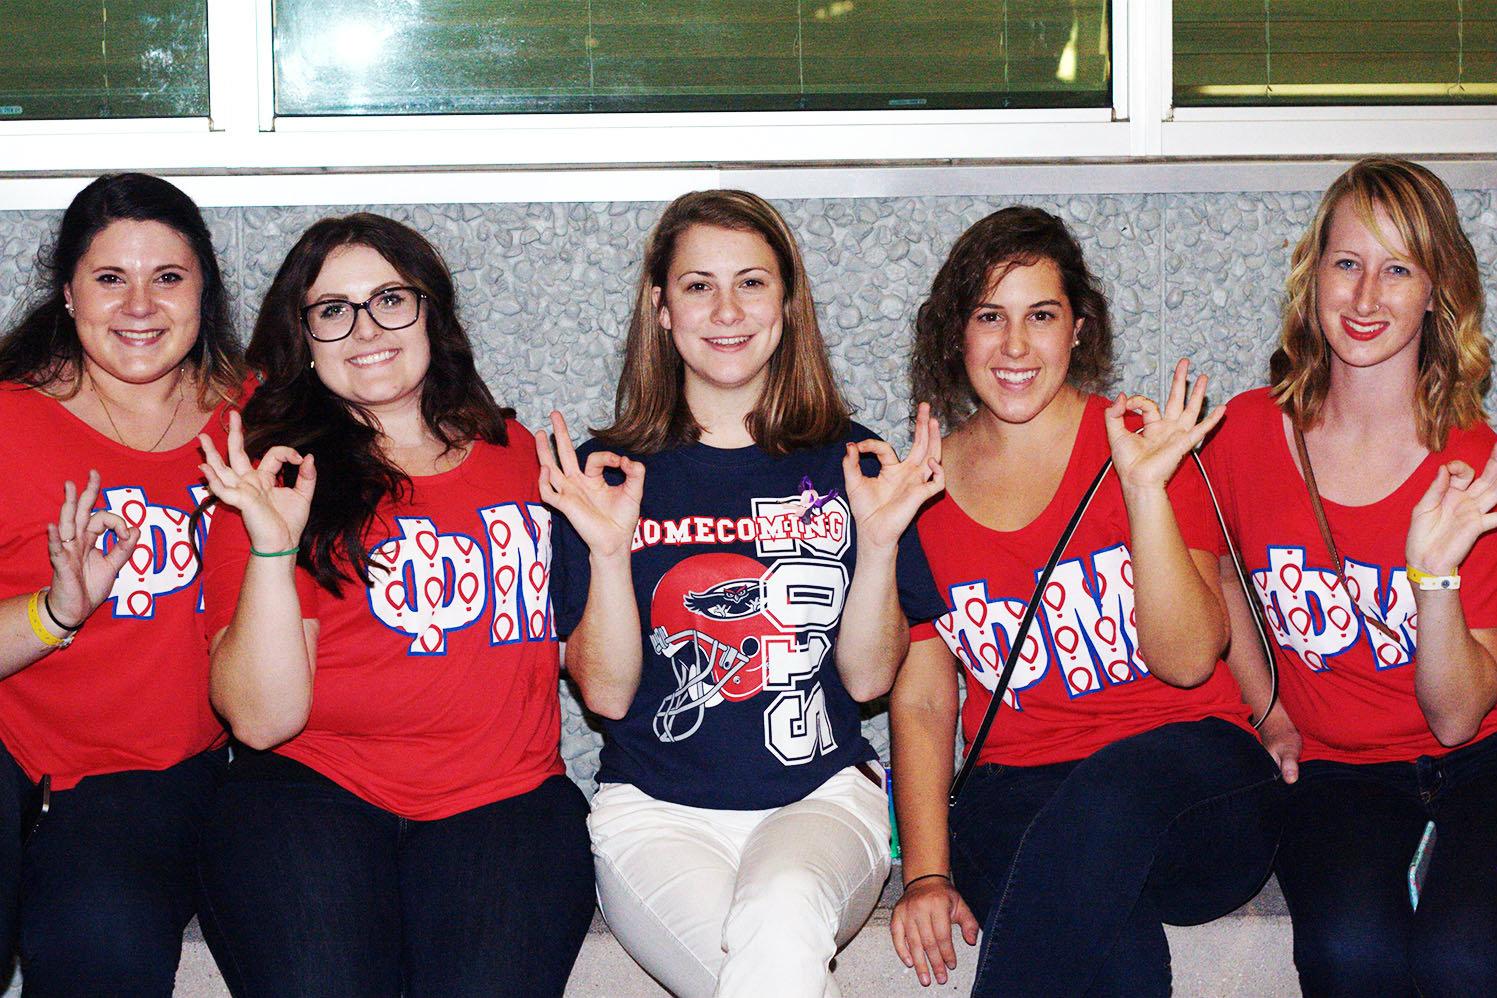 Student Body President Kathryn Edmunds (Center) enjoys the rally –one among many homecoming festivities—along with (left to right) Communications Sophomore Alex Eisenhauer, Elementary Education Sophomore Shannon Pyle, Business Senior Brittany McDaniel, and Business Senior Ashley Markey. Jessica Wilkerson | Contributing Photographer 